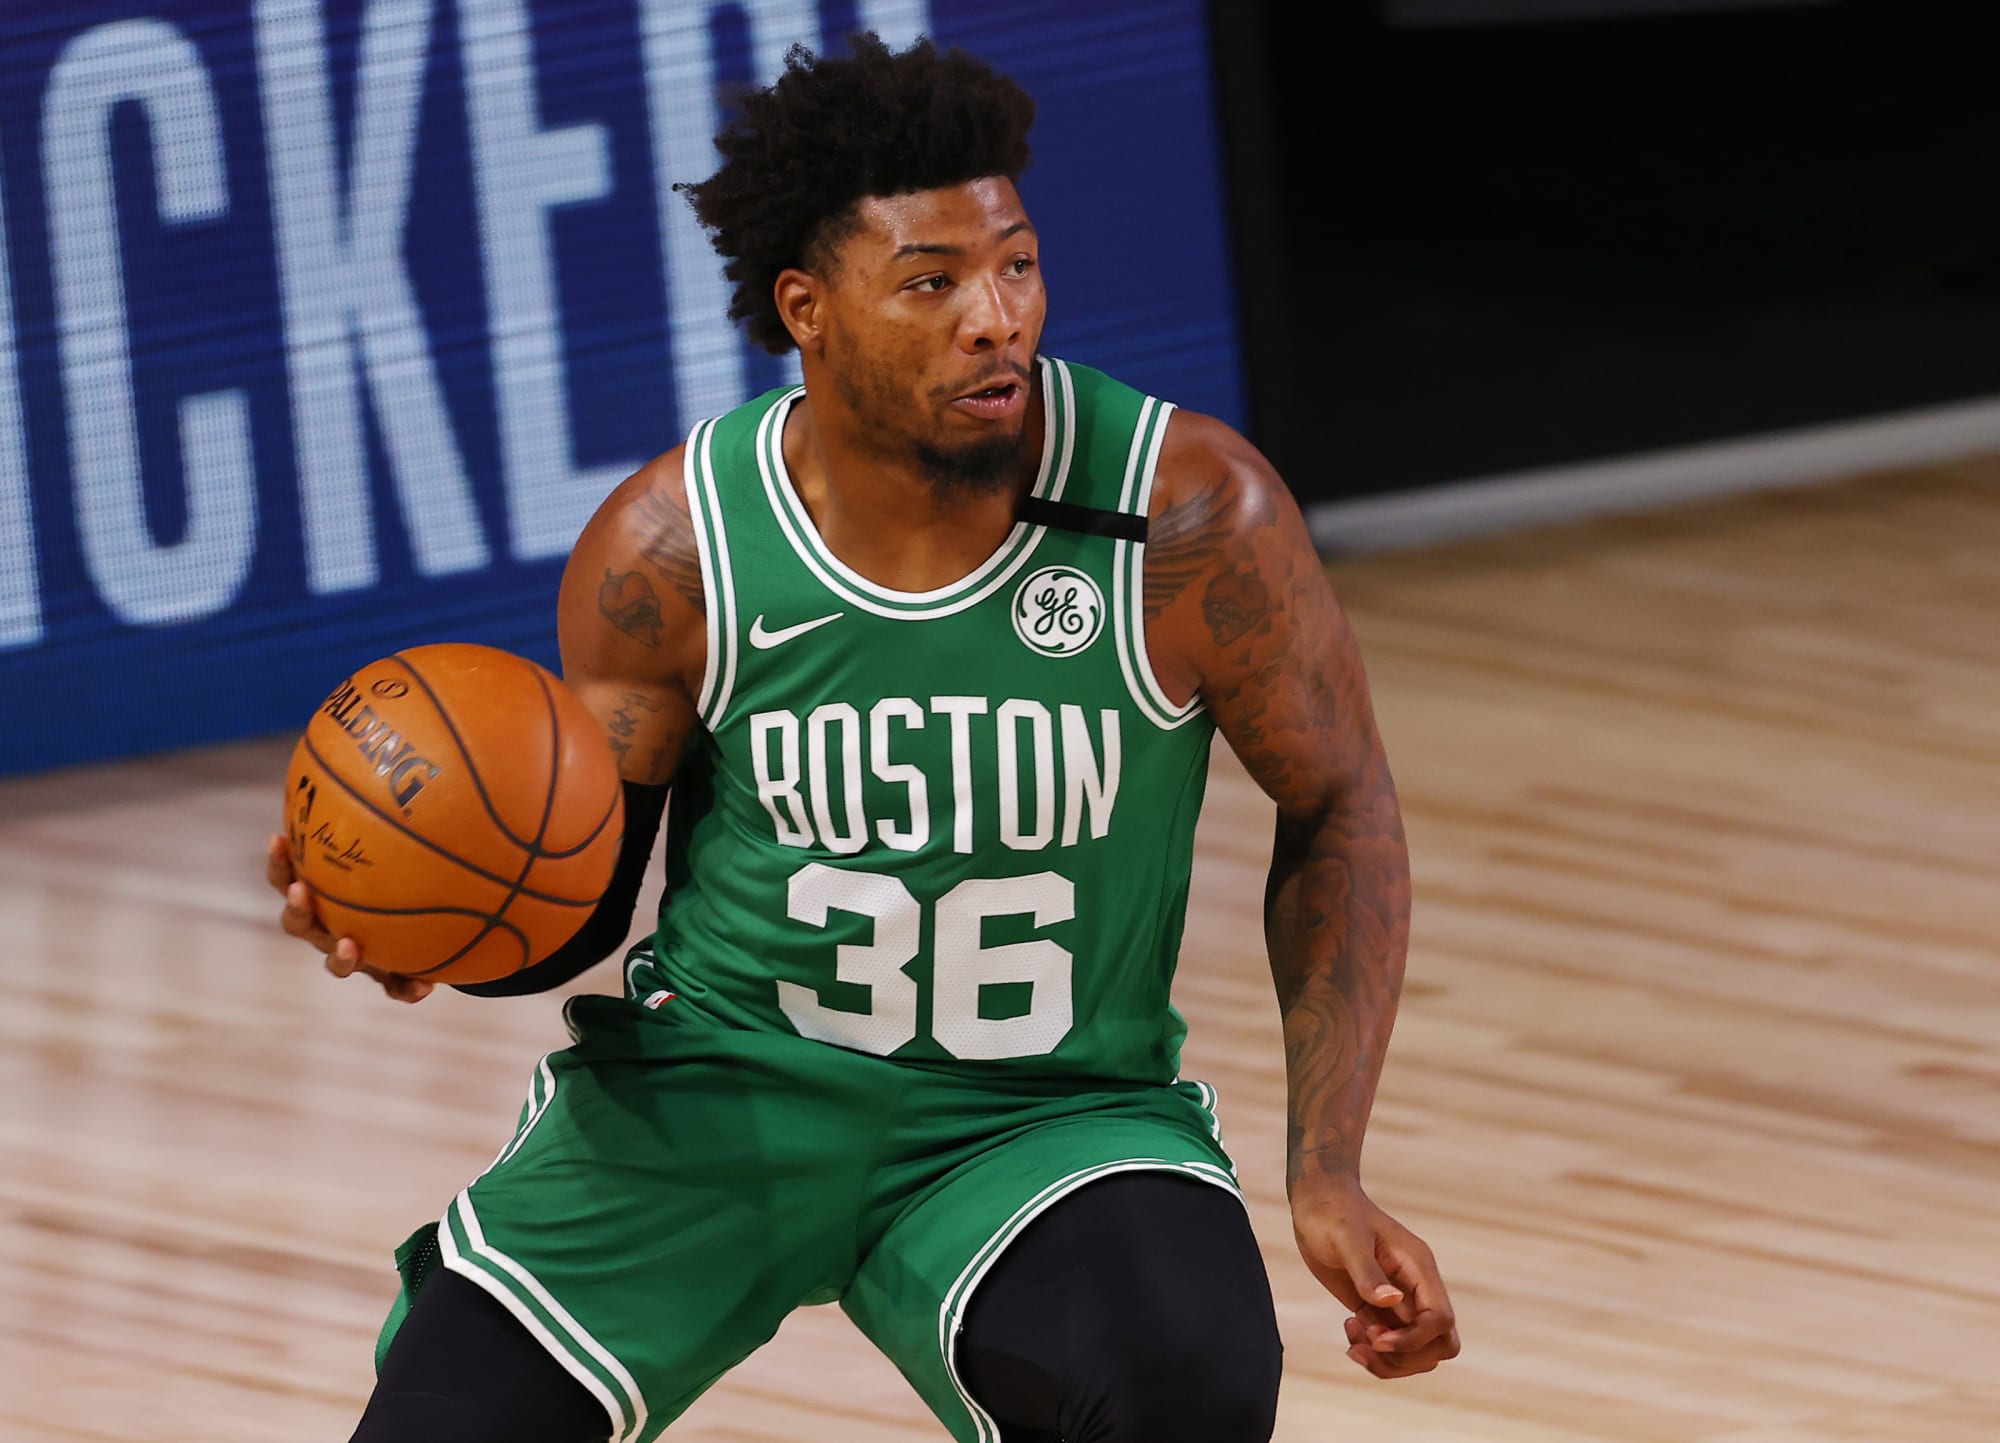 With Smart playing his best defense, sky is the limit for Boston Celtics